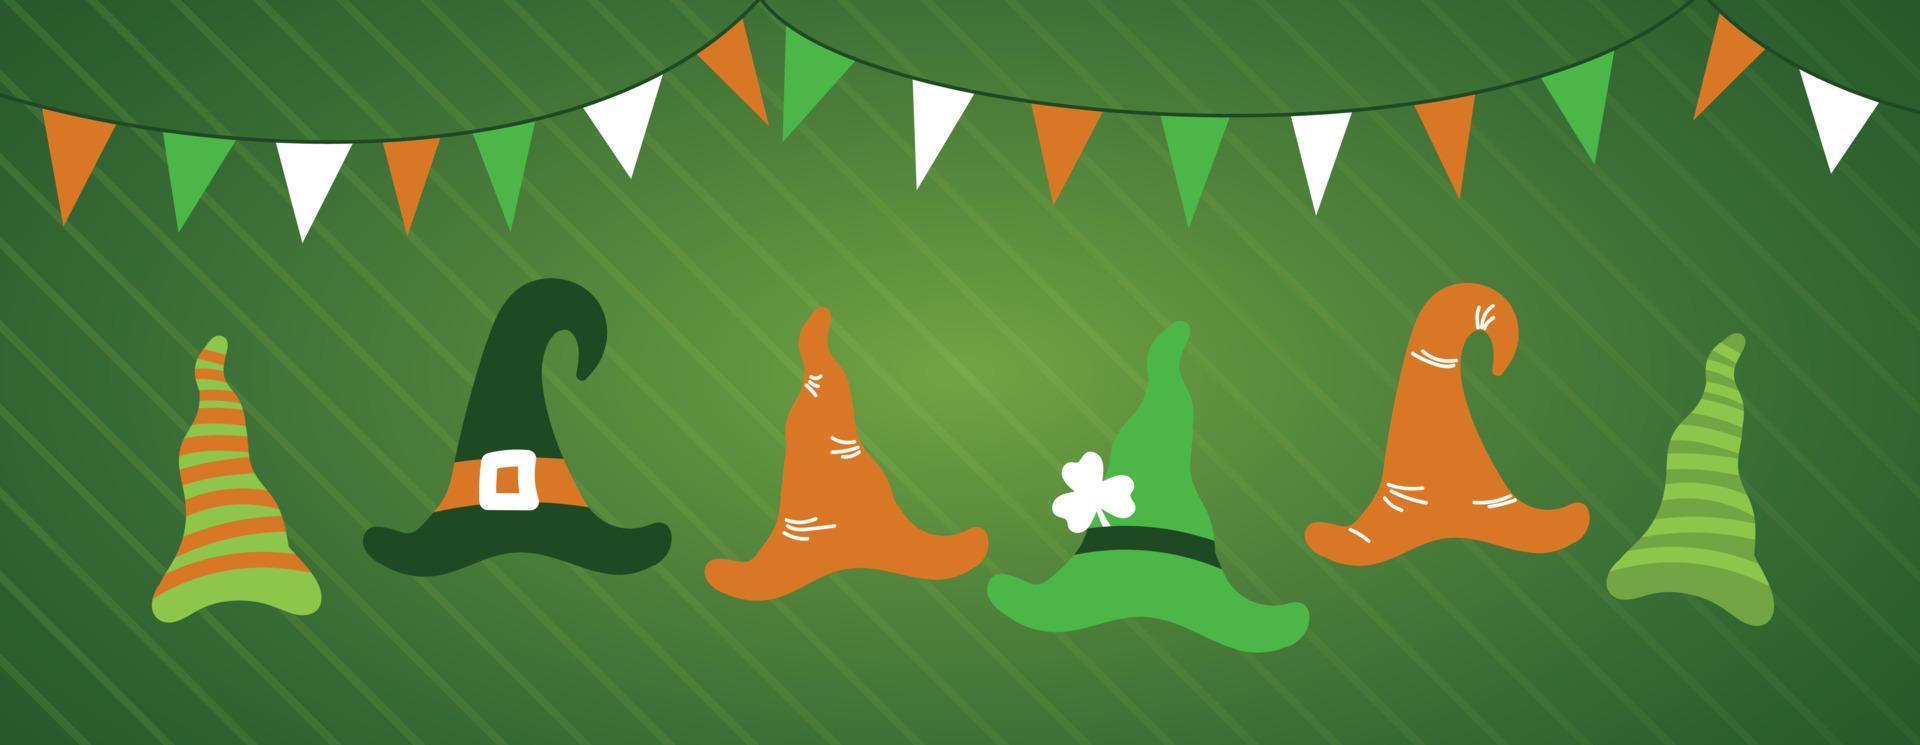 Cute caps and leprechaun hats under flags with colors of the Irish flag for celebrating St Patrick's Day vector